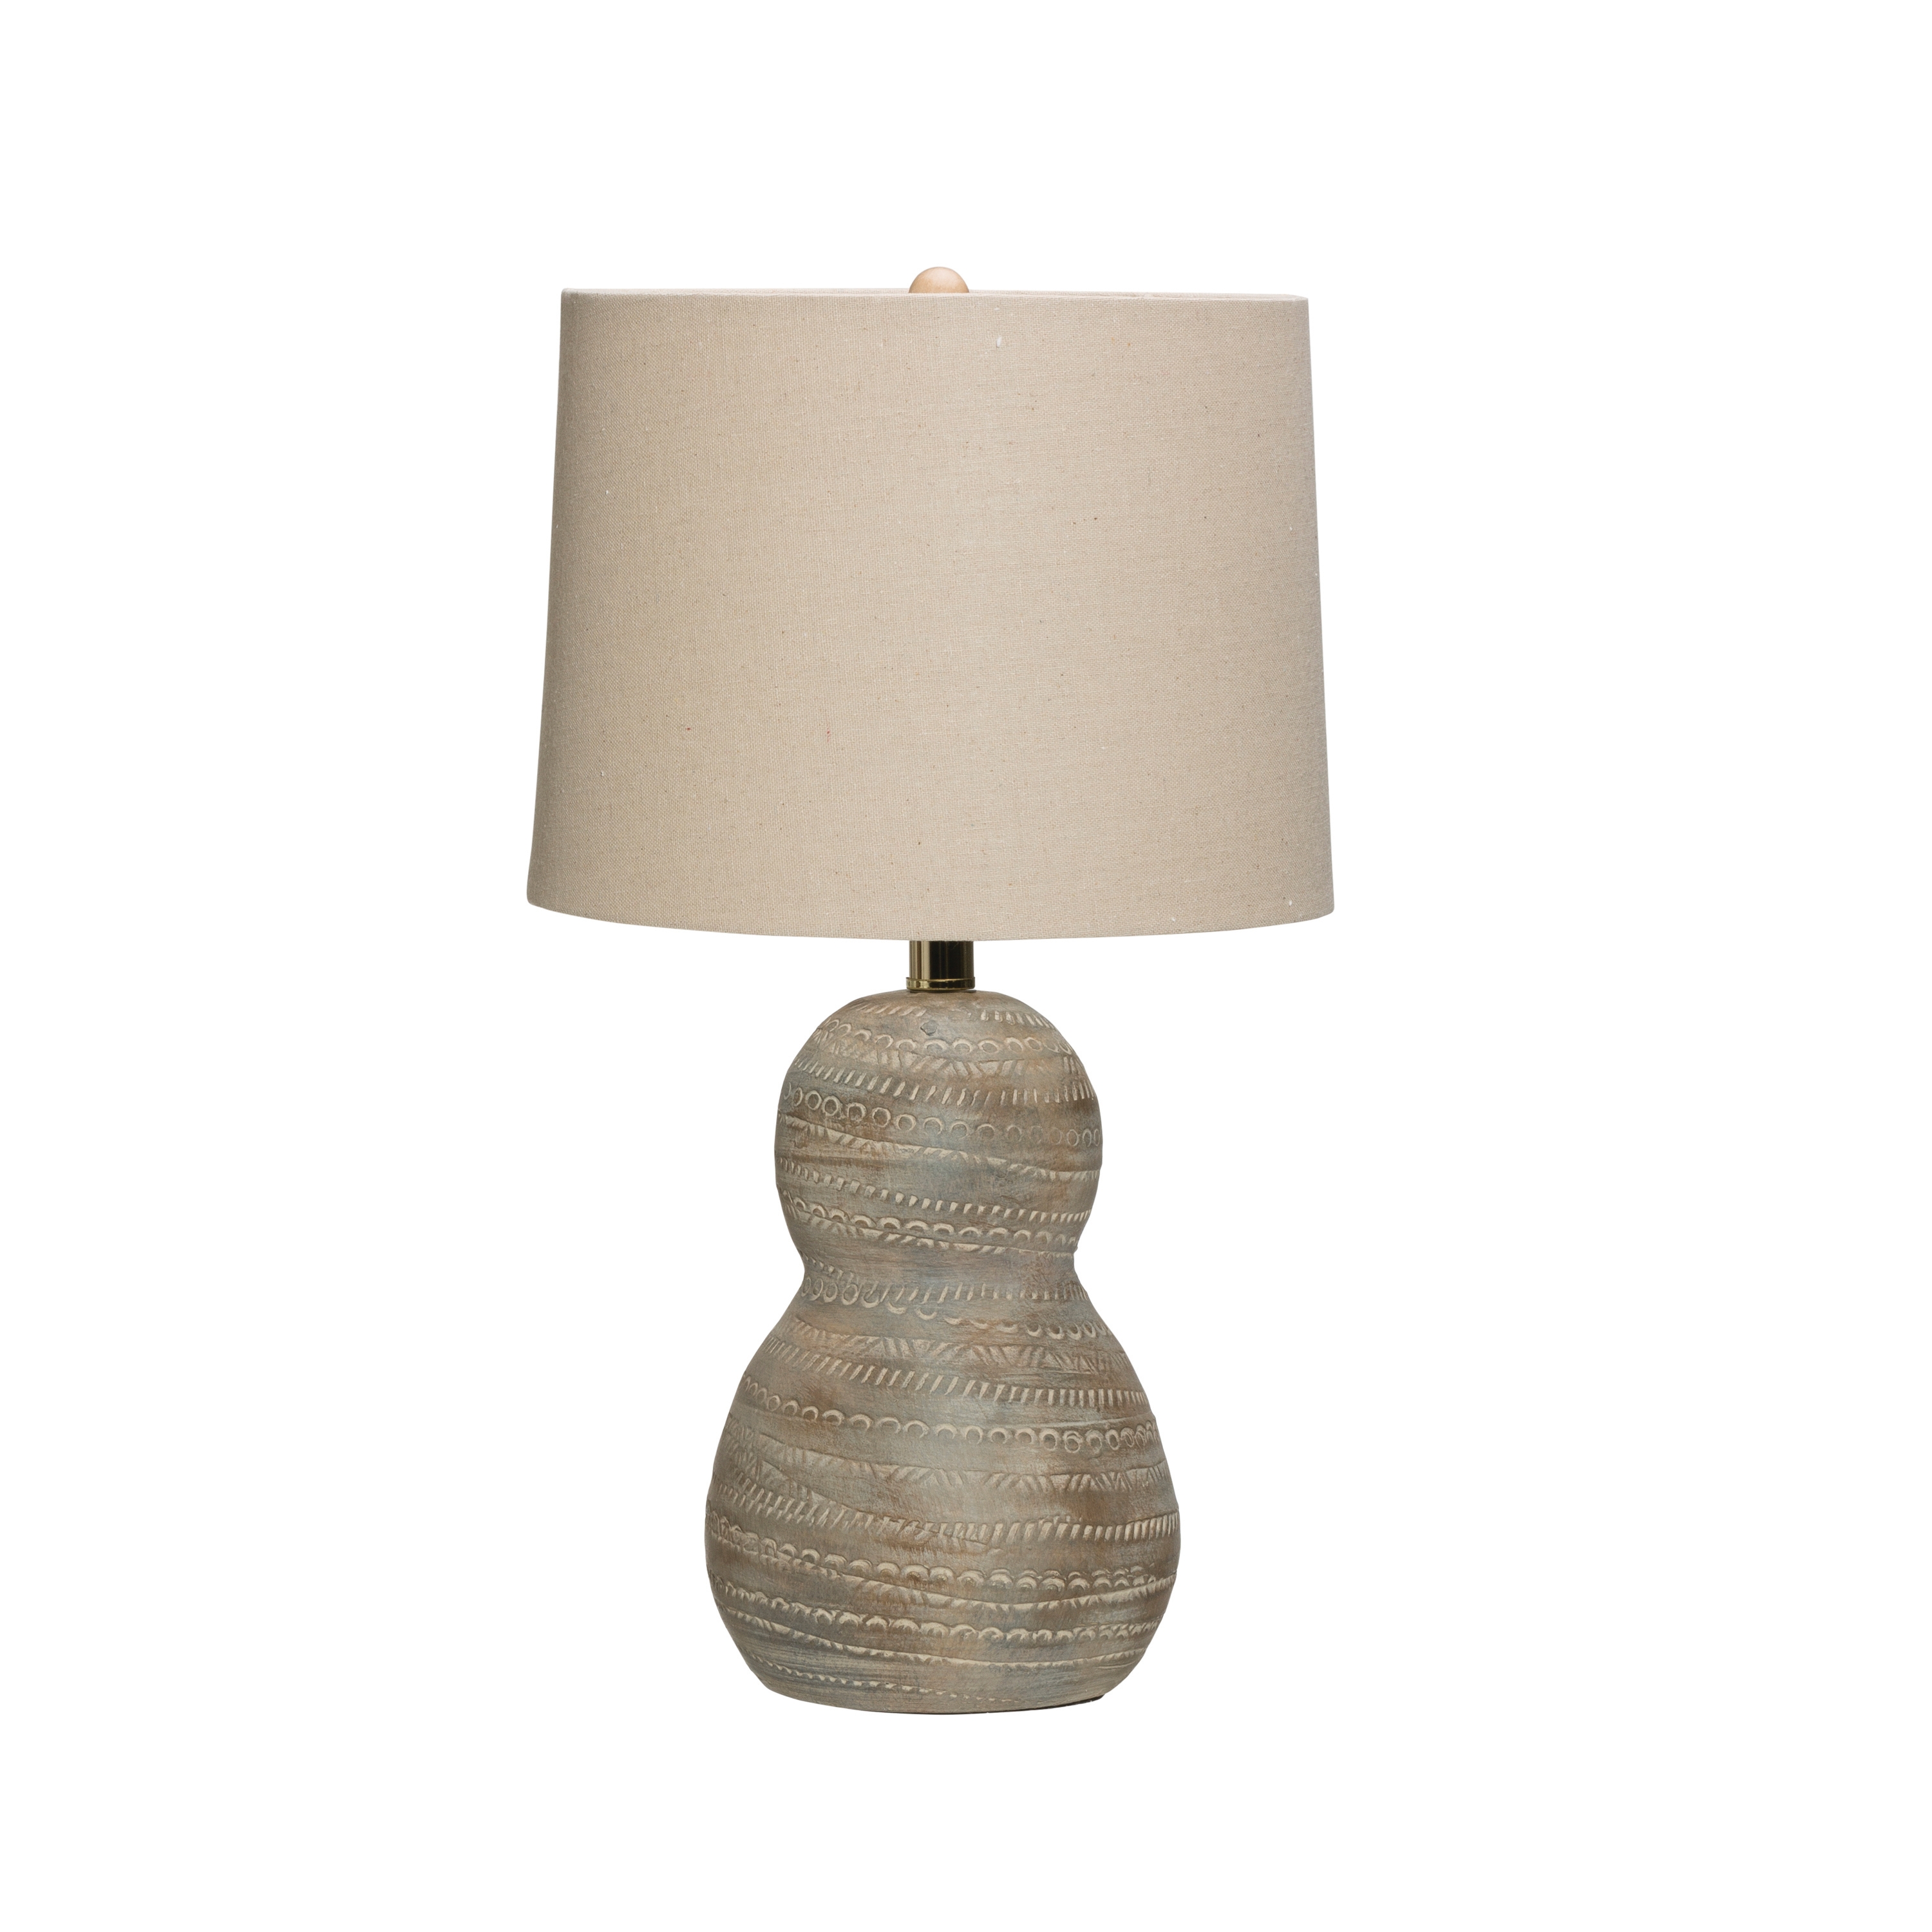 Distressed Debossed Terracotta Table Lamp with Linen Shade - Image 0